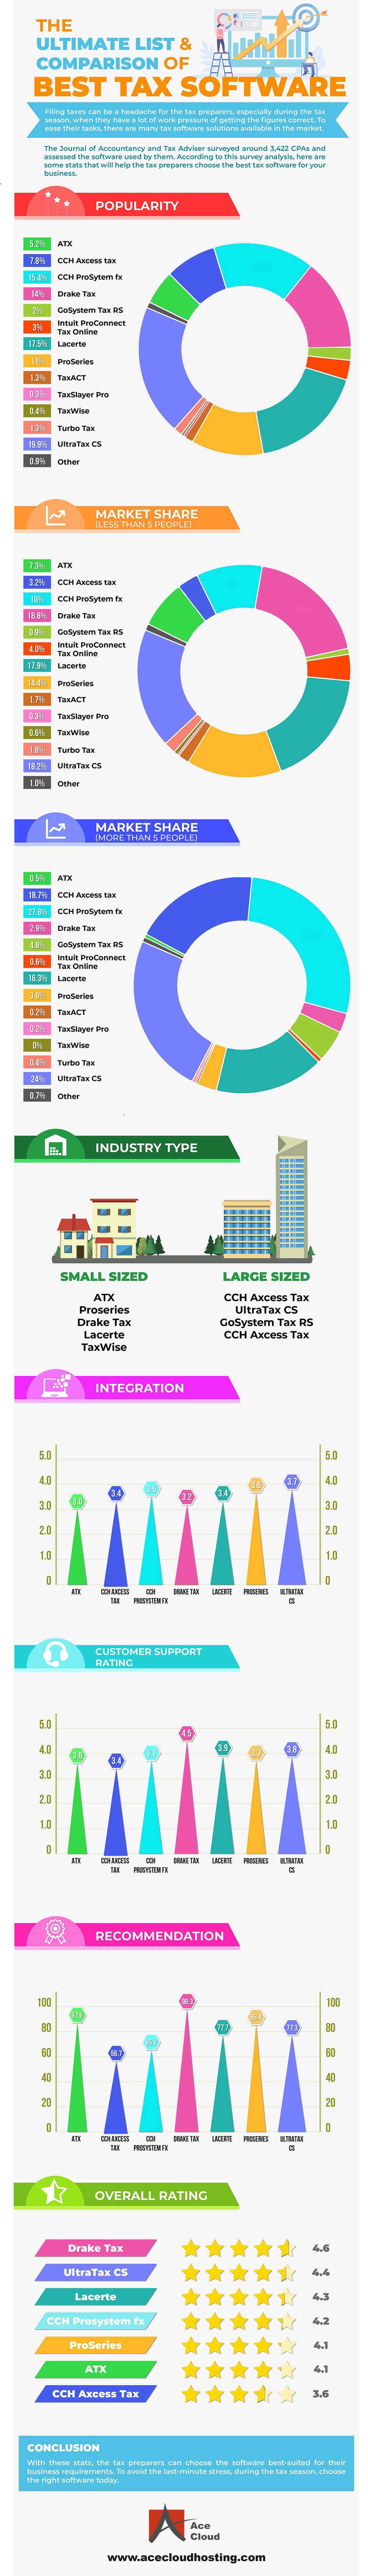 The Ultimate List and Comparison of Best Tax Software Solutions [Infographic]